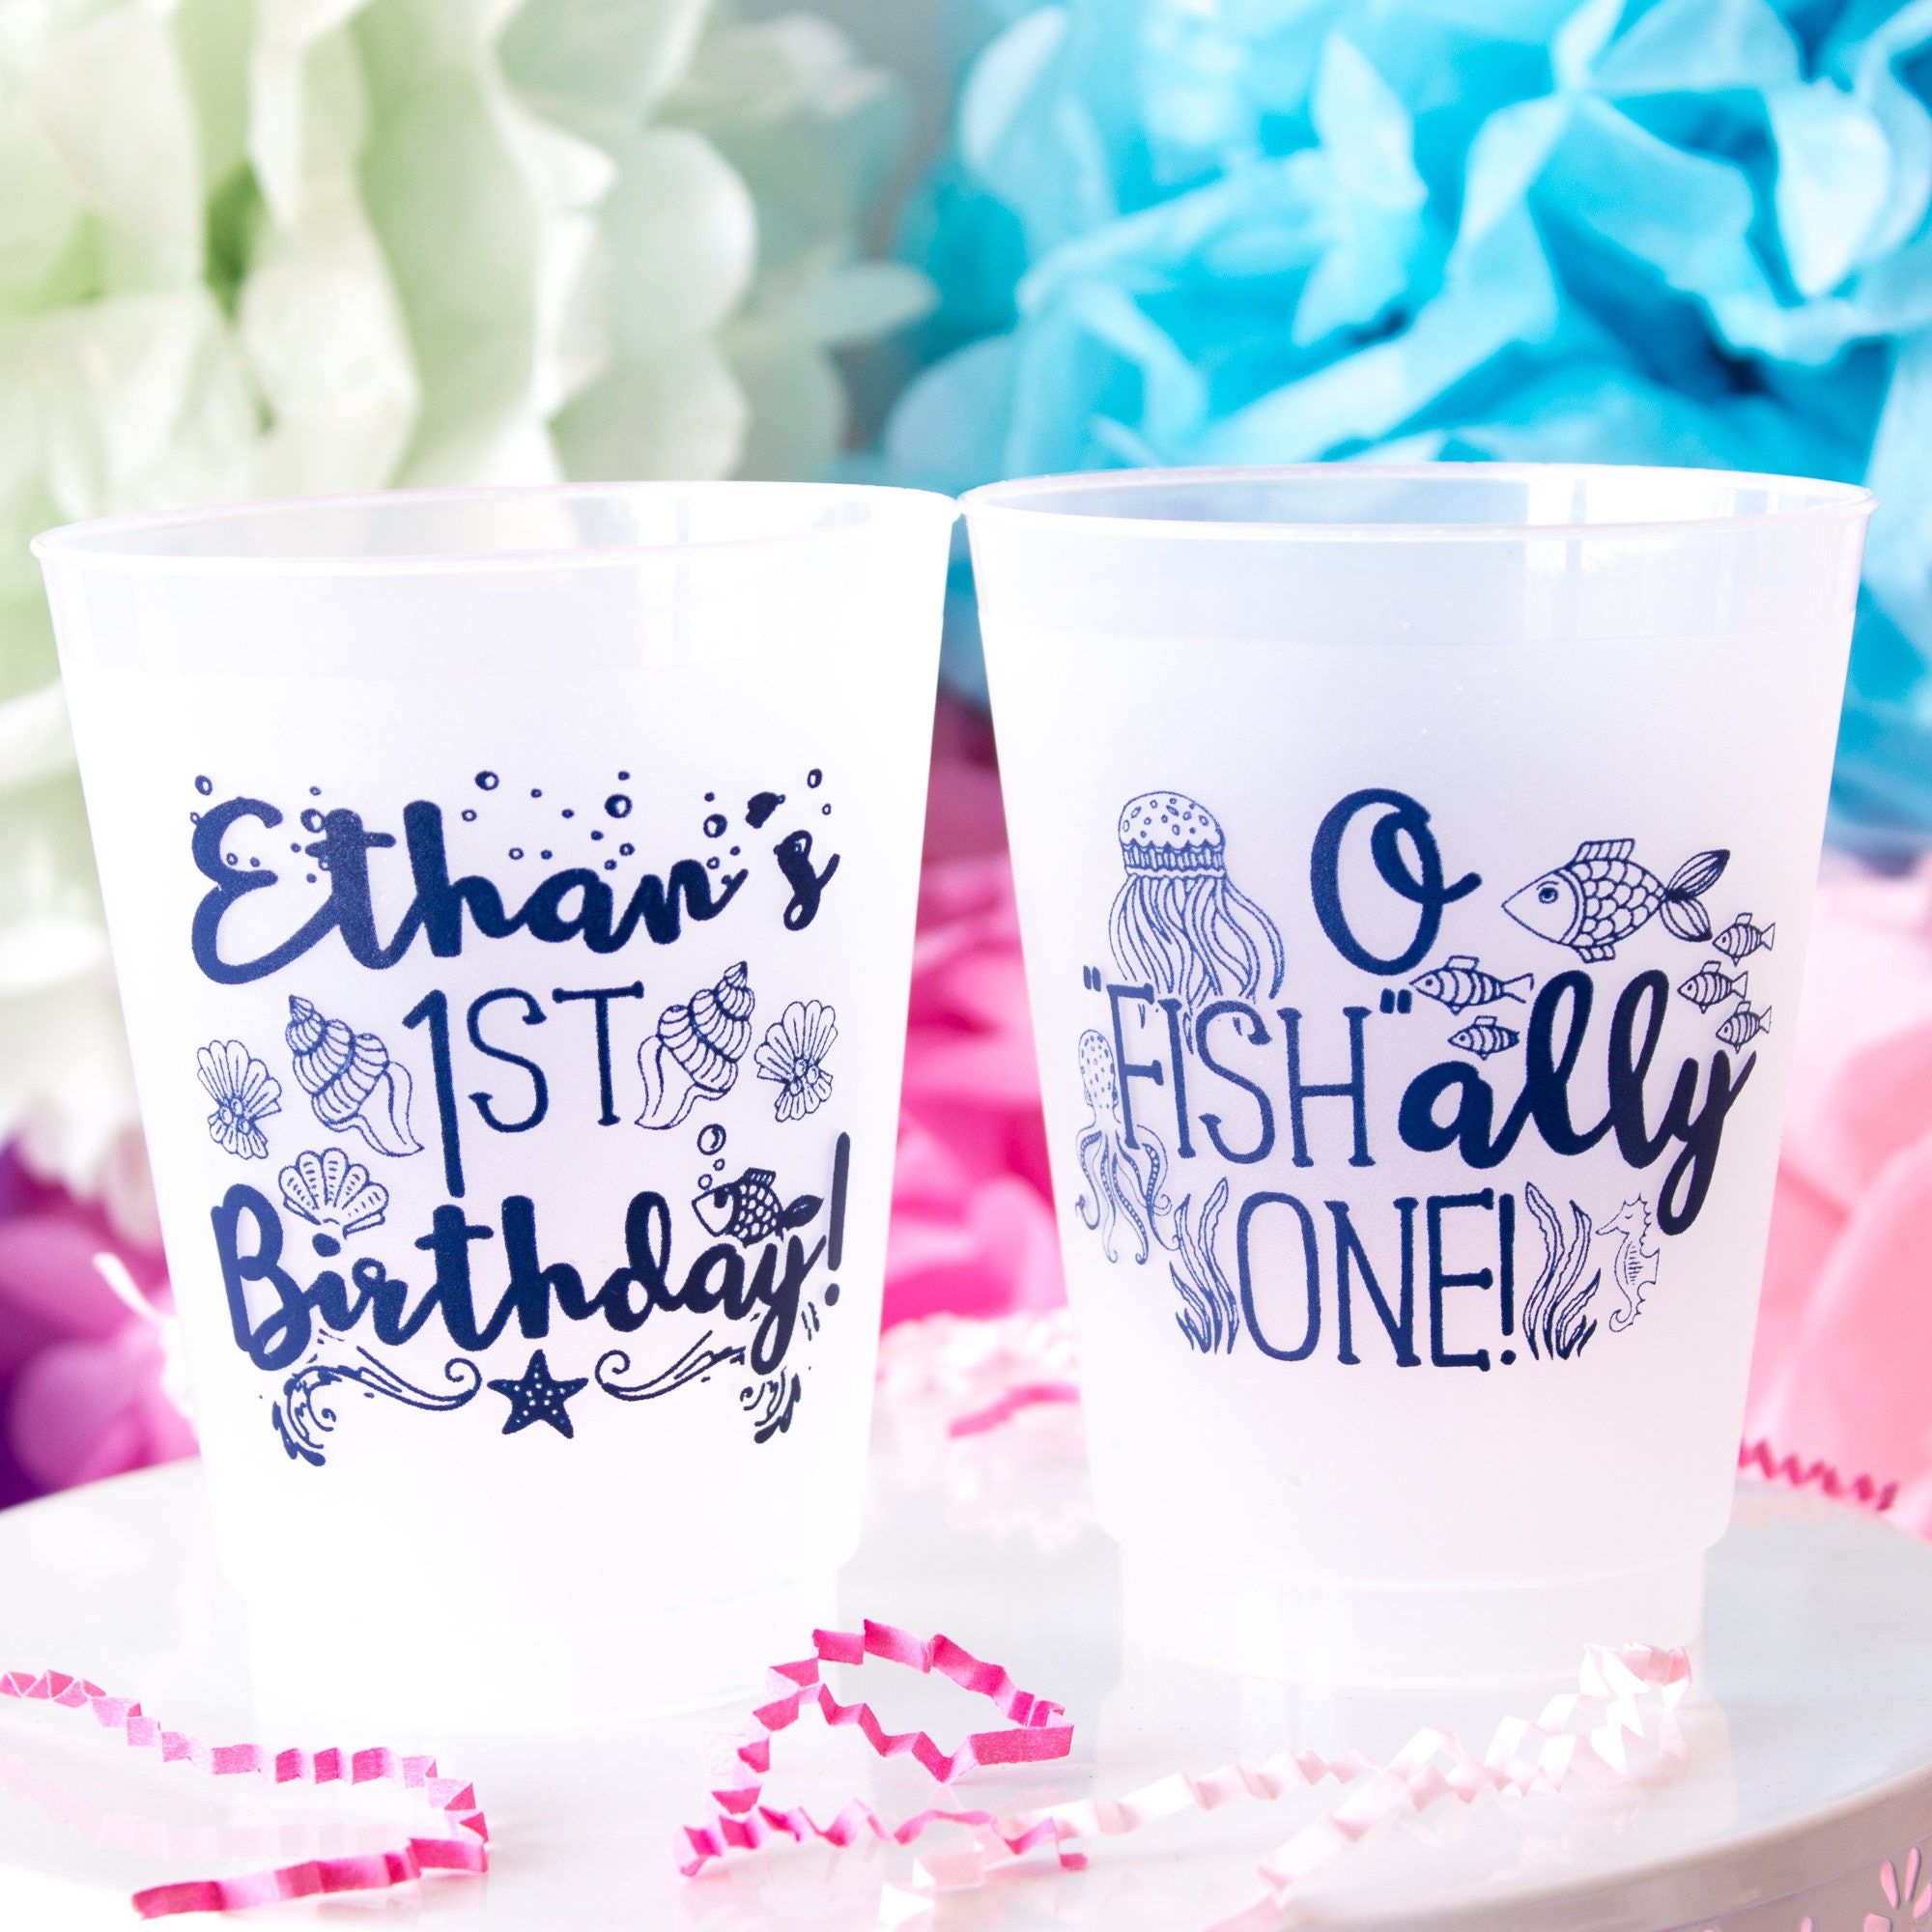 Cheers To 60 Years Frosted Cups